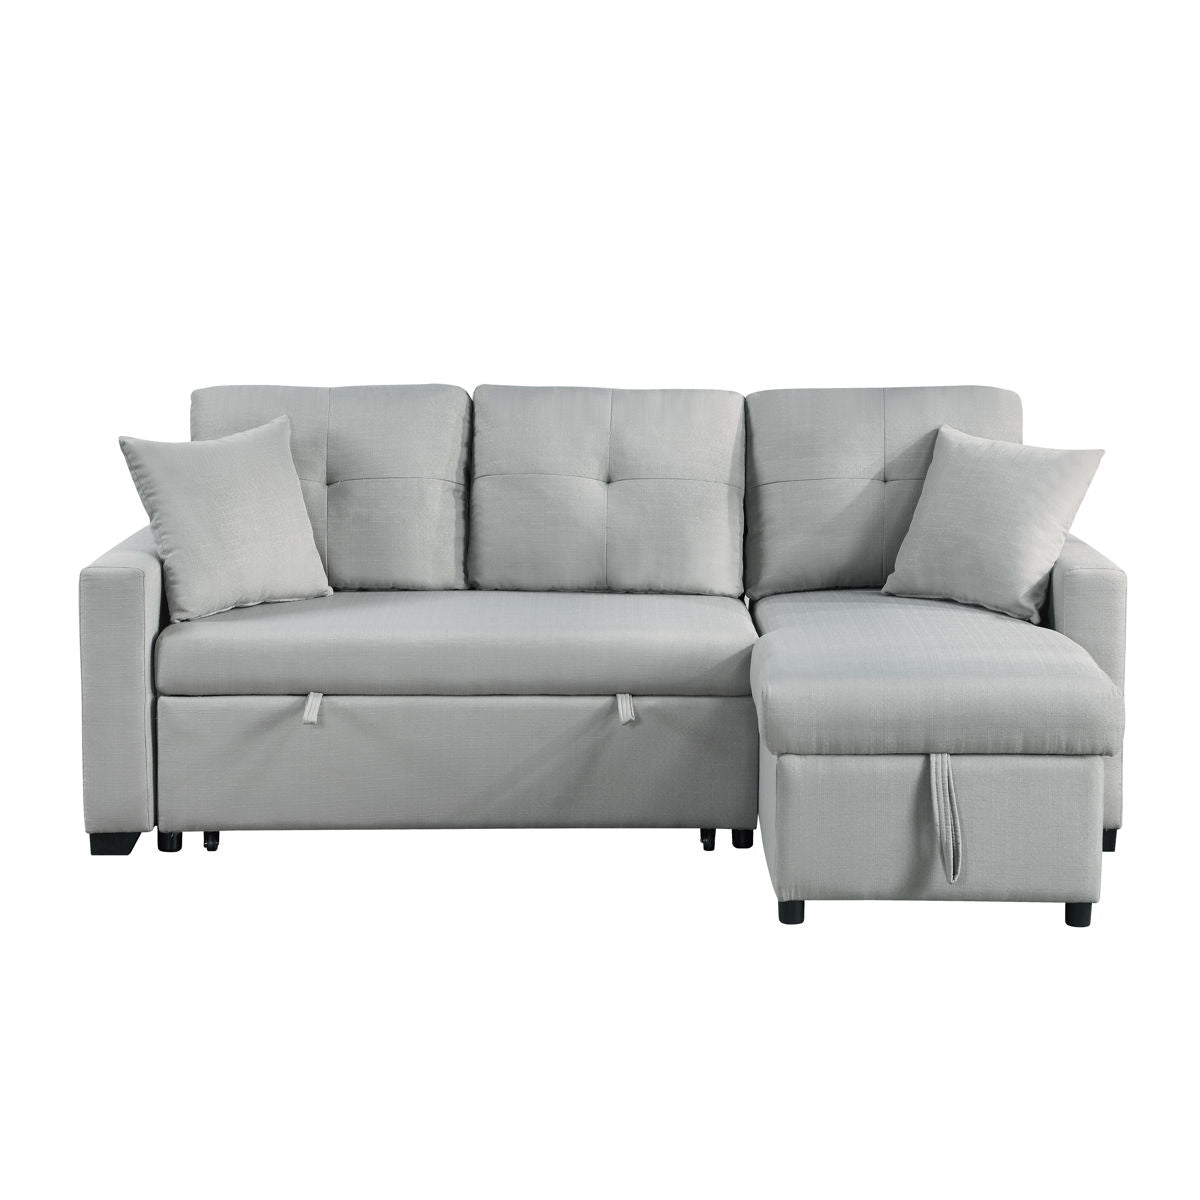 Francine - Linen Reversible Sleeper Sectional Sofa With Storage Chaise